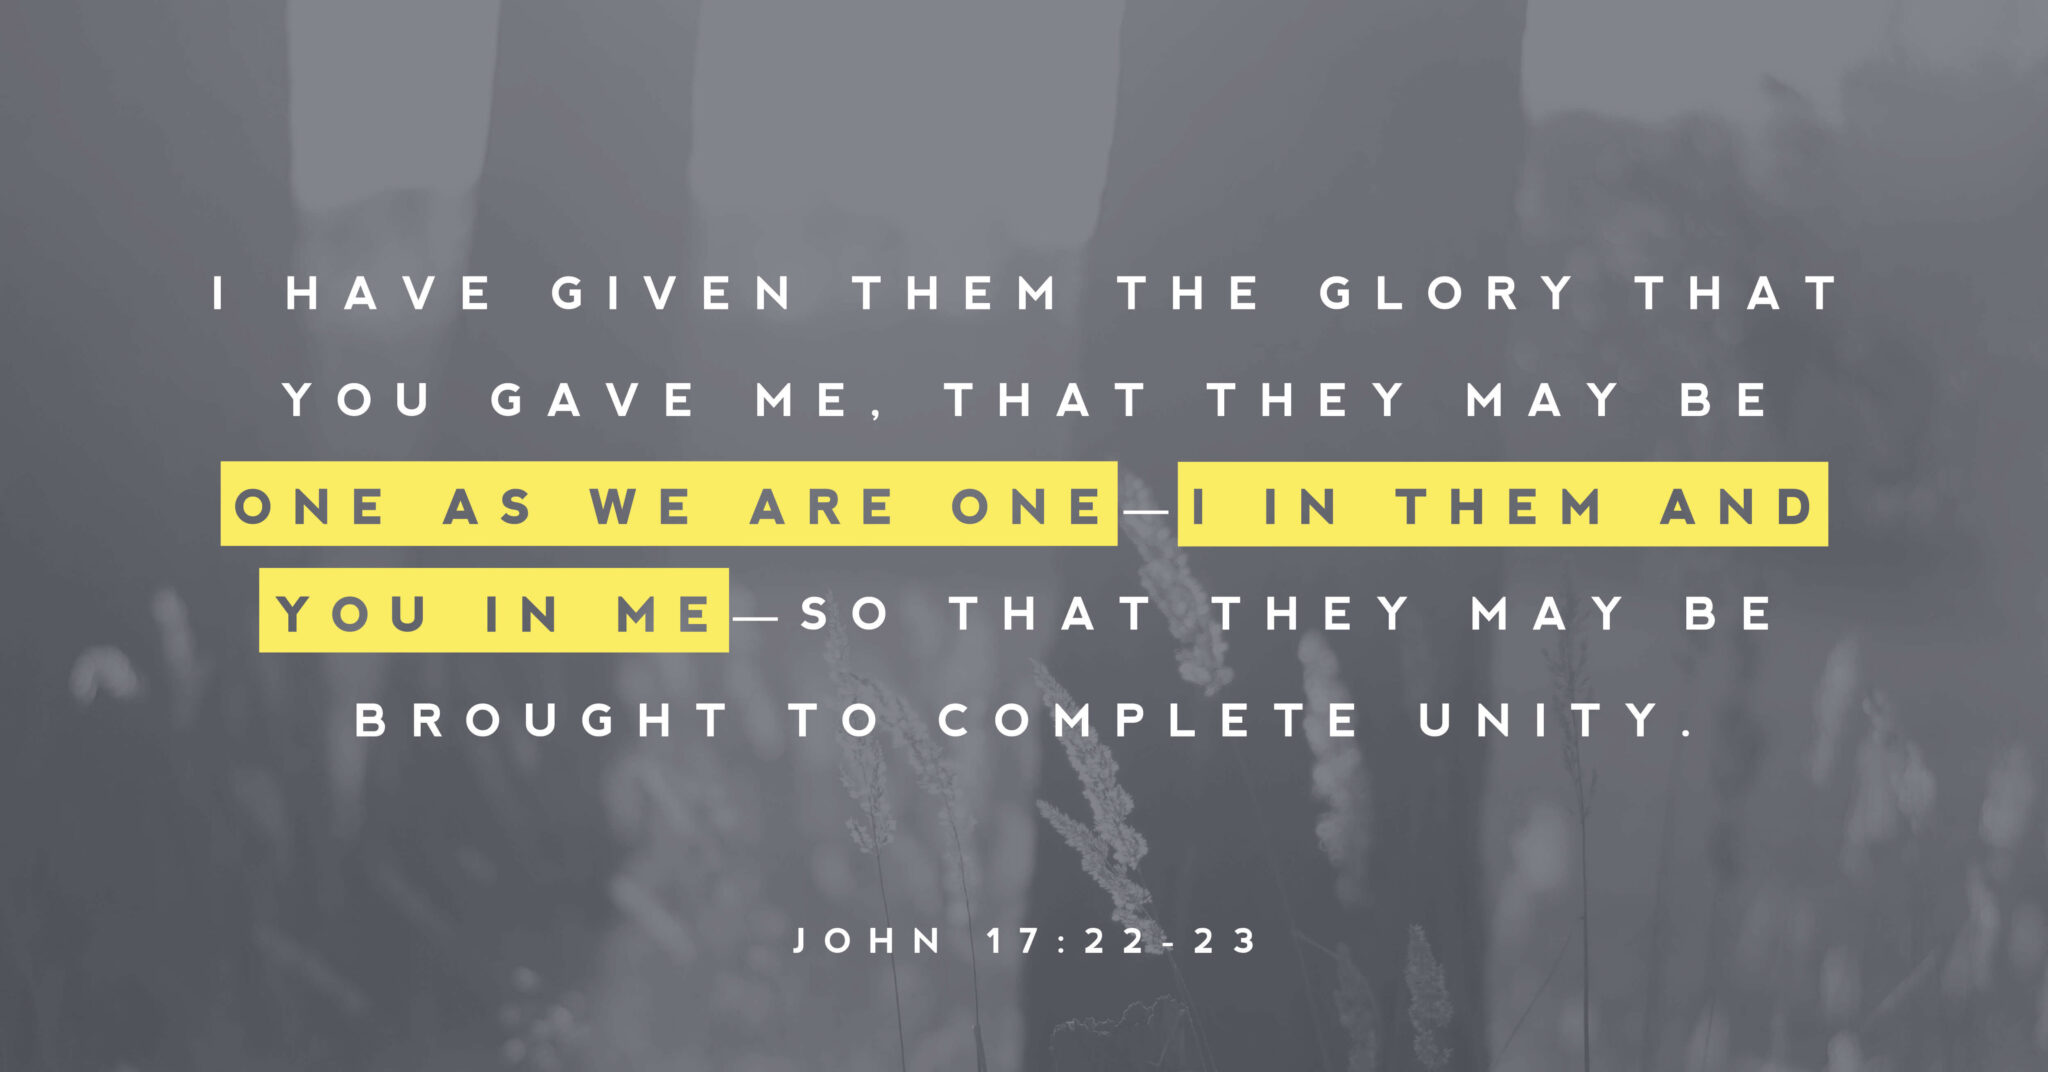 A picture of wheat with words that read "I have given them the glory that you gave me. That they may be one as we are one-I in them and you in me-so that they may be brought to complete unity" (John 17:22-23).